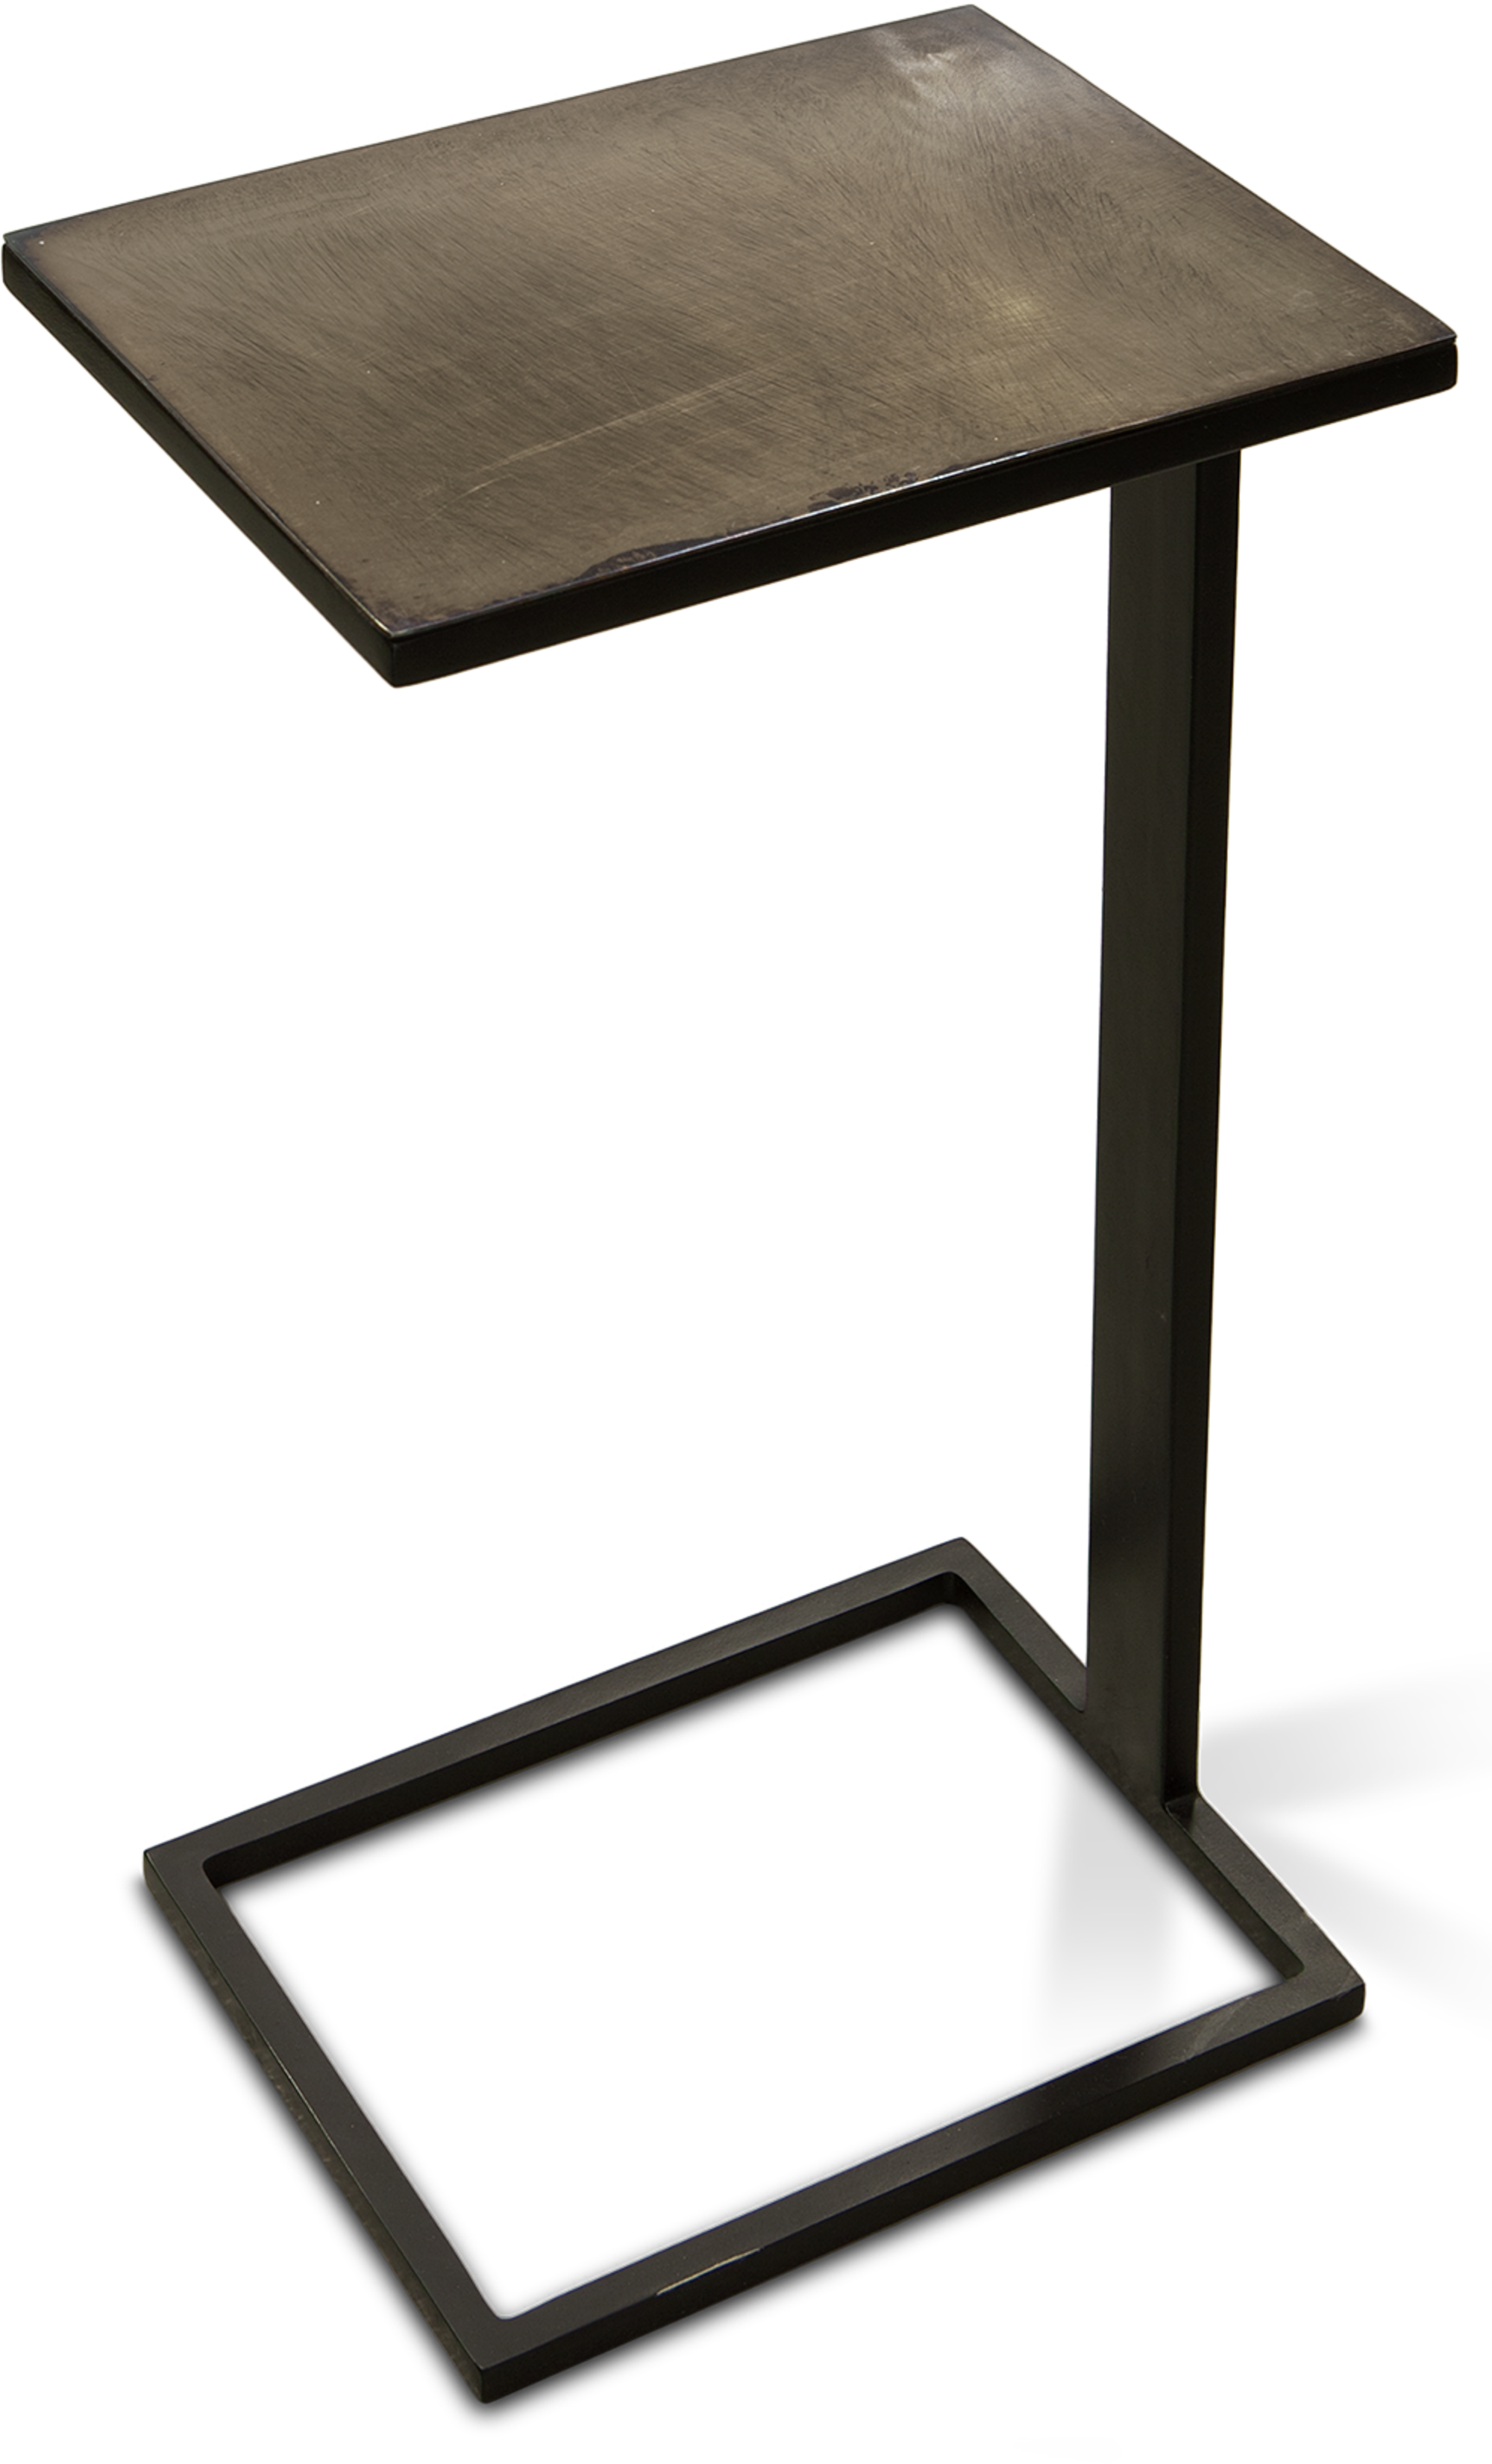 Toby side table